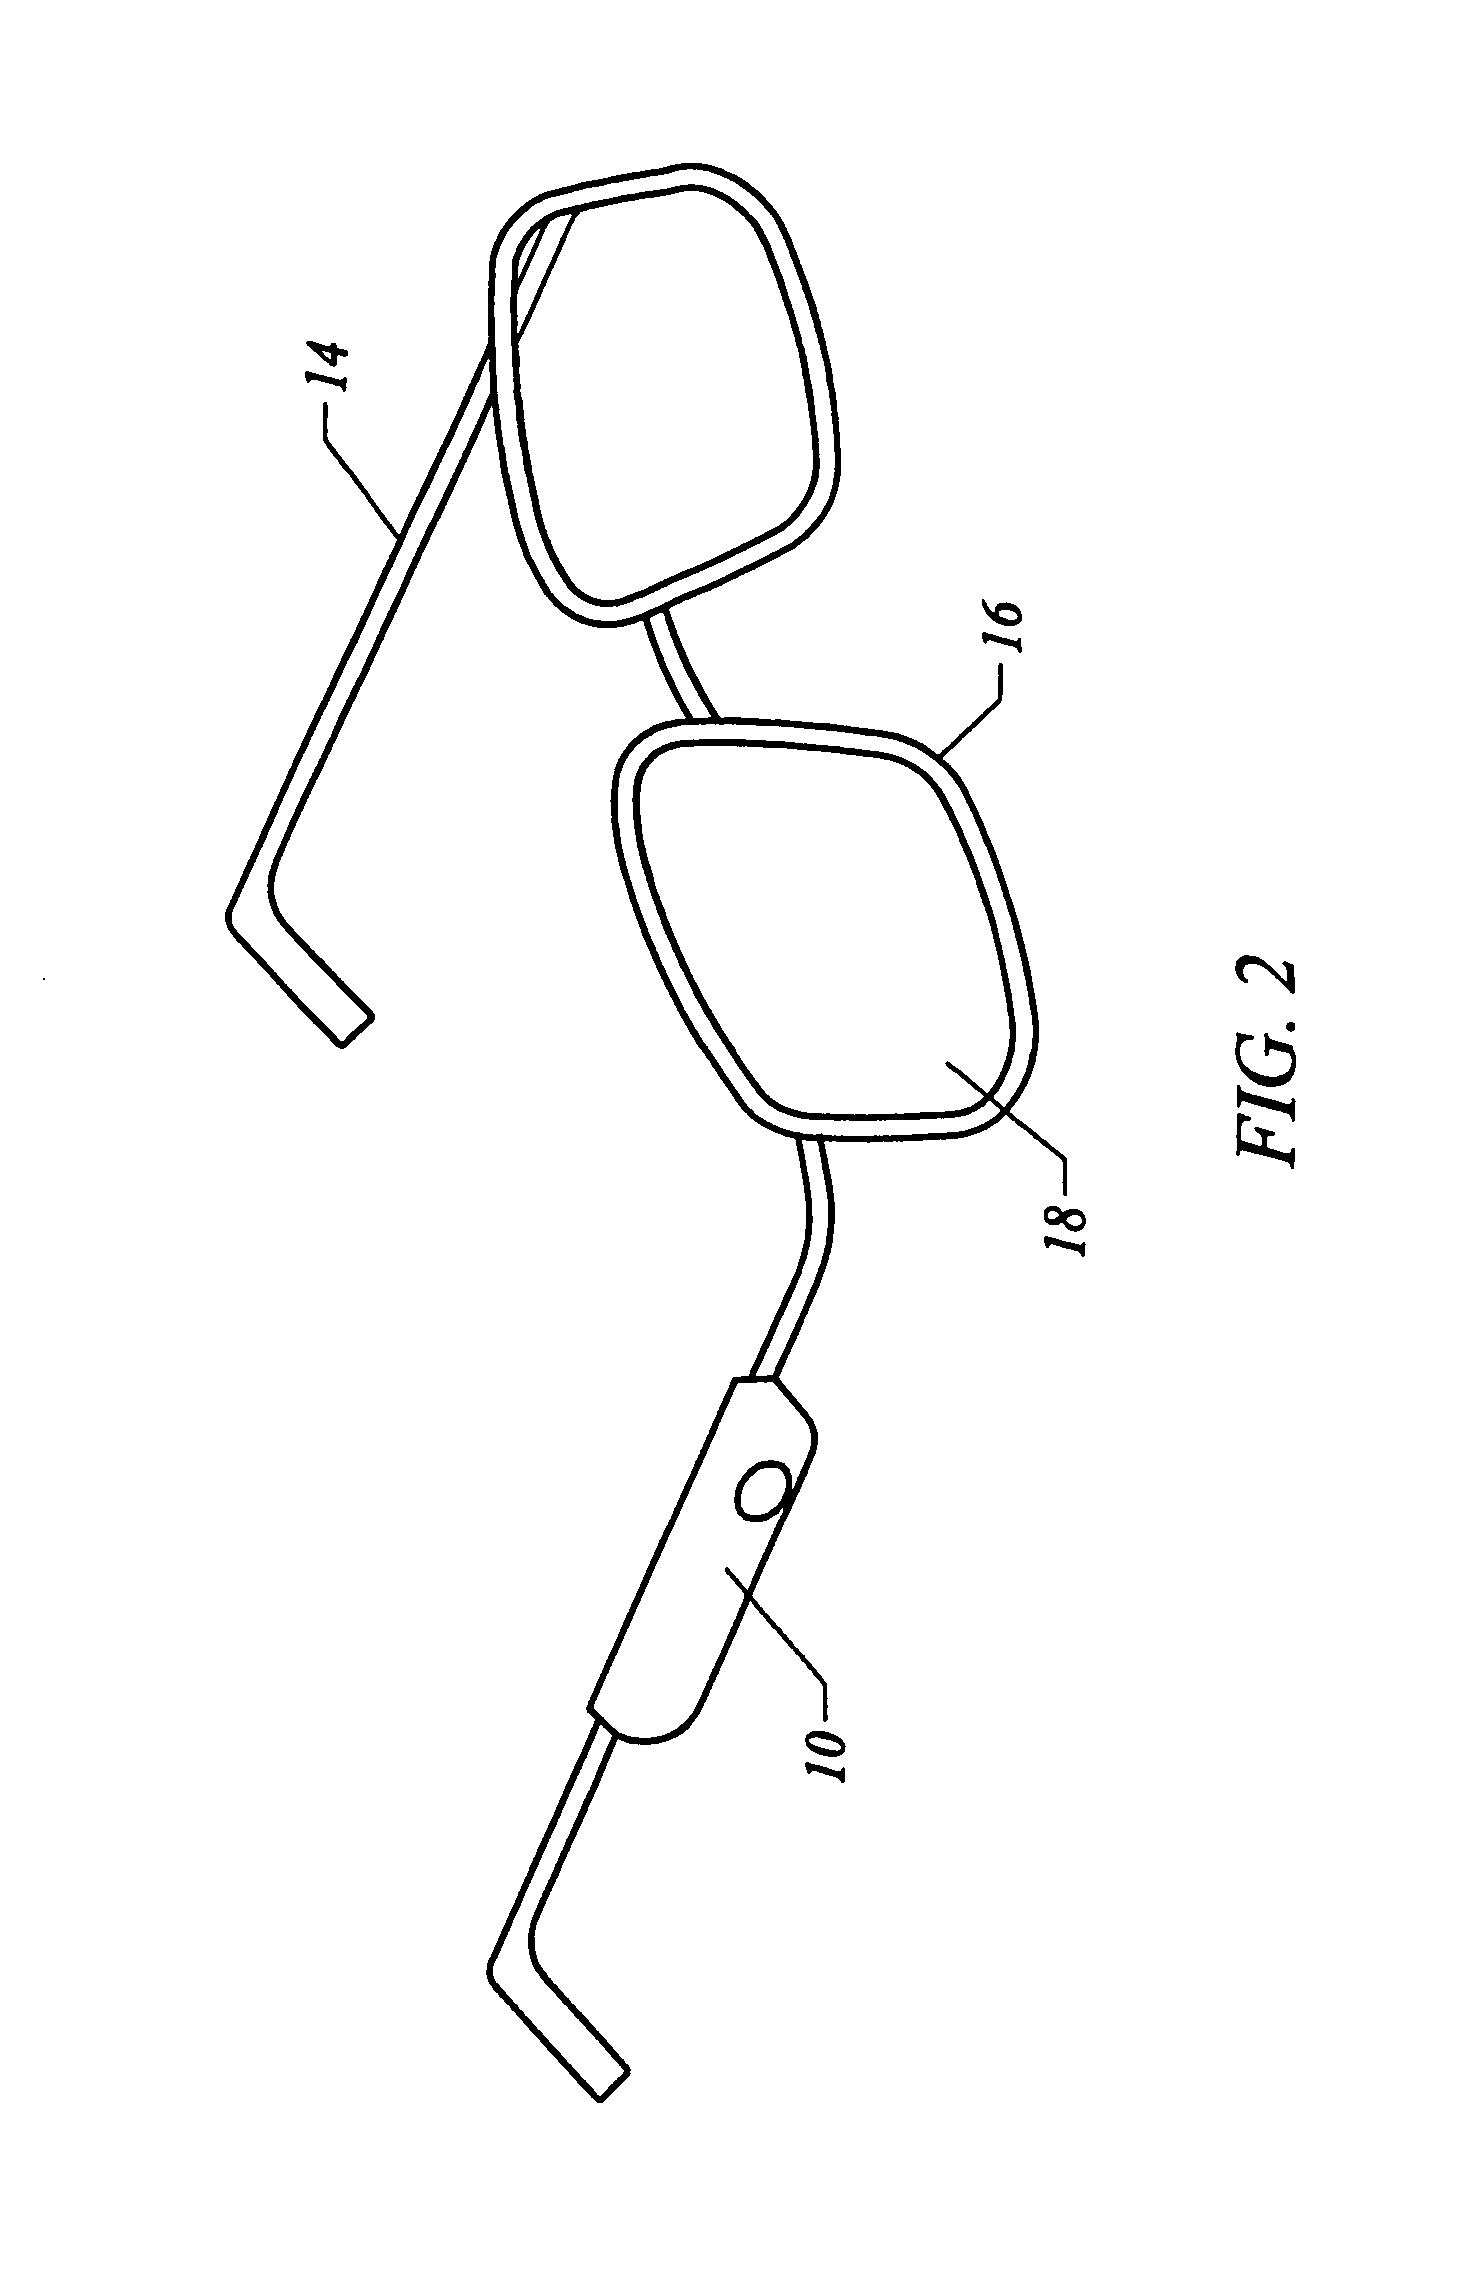 Optical system for monitoring eye movement